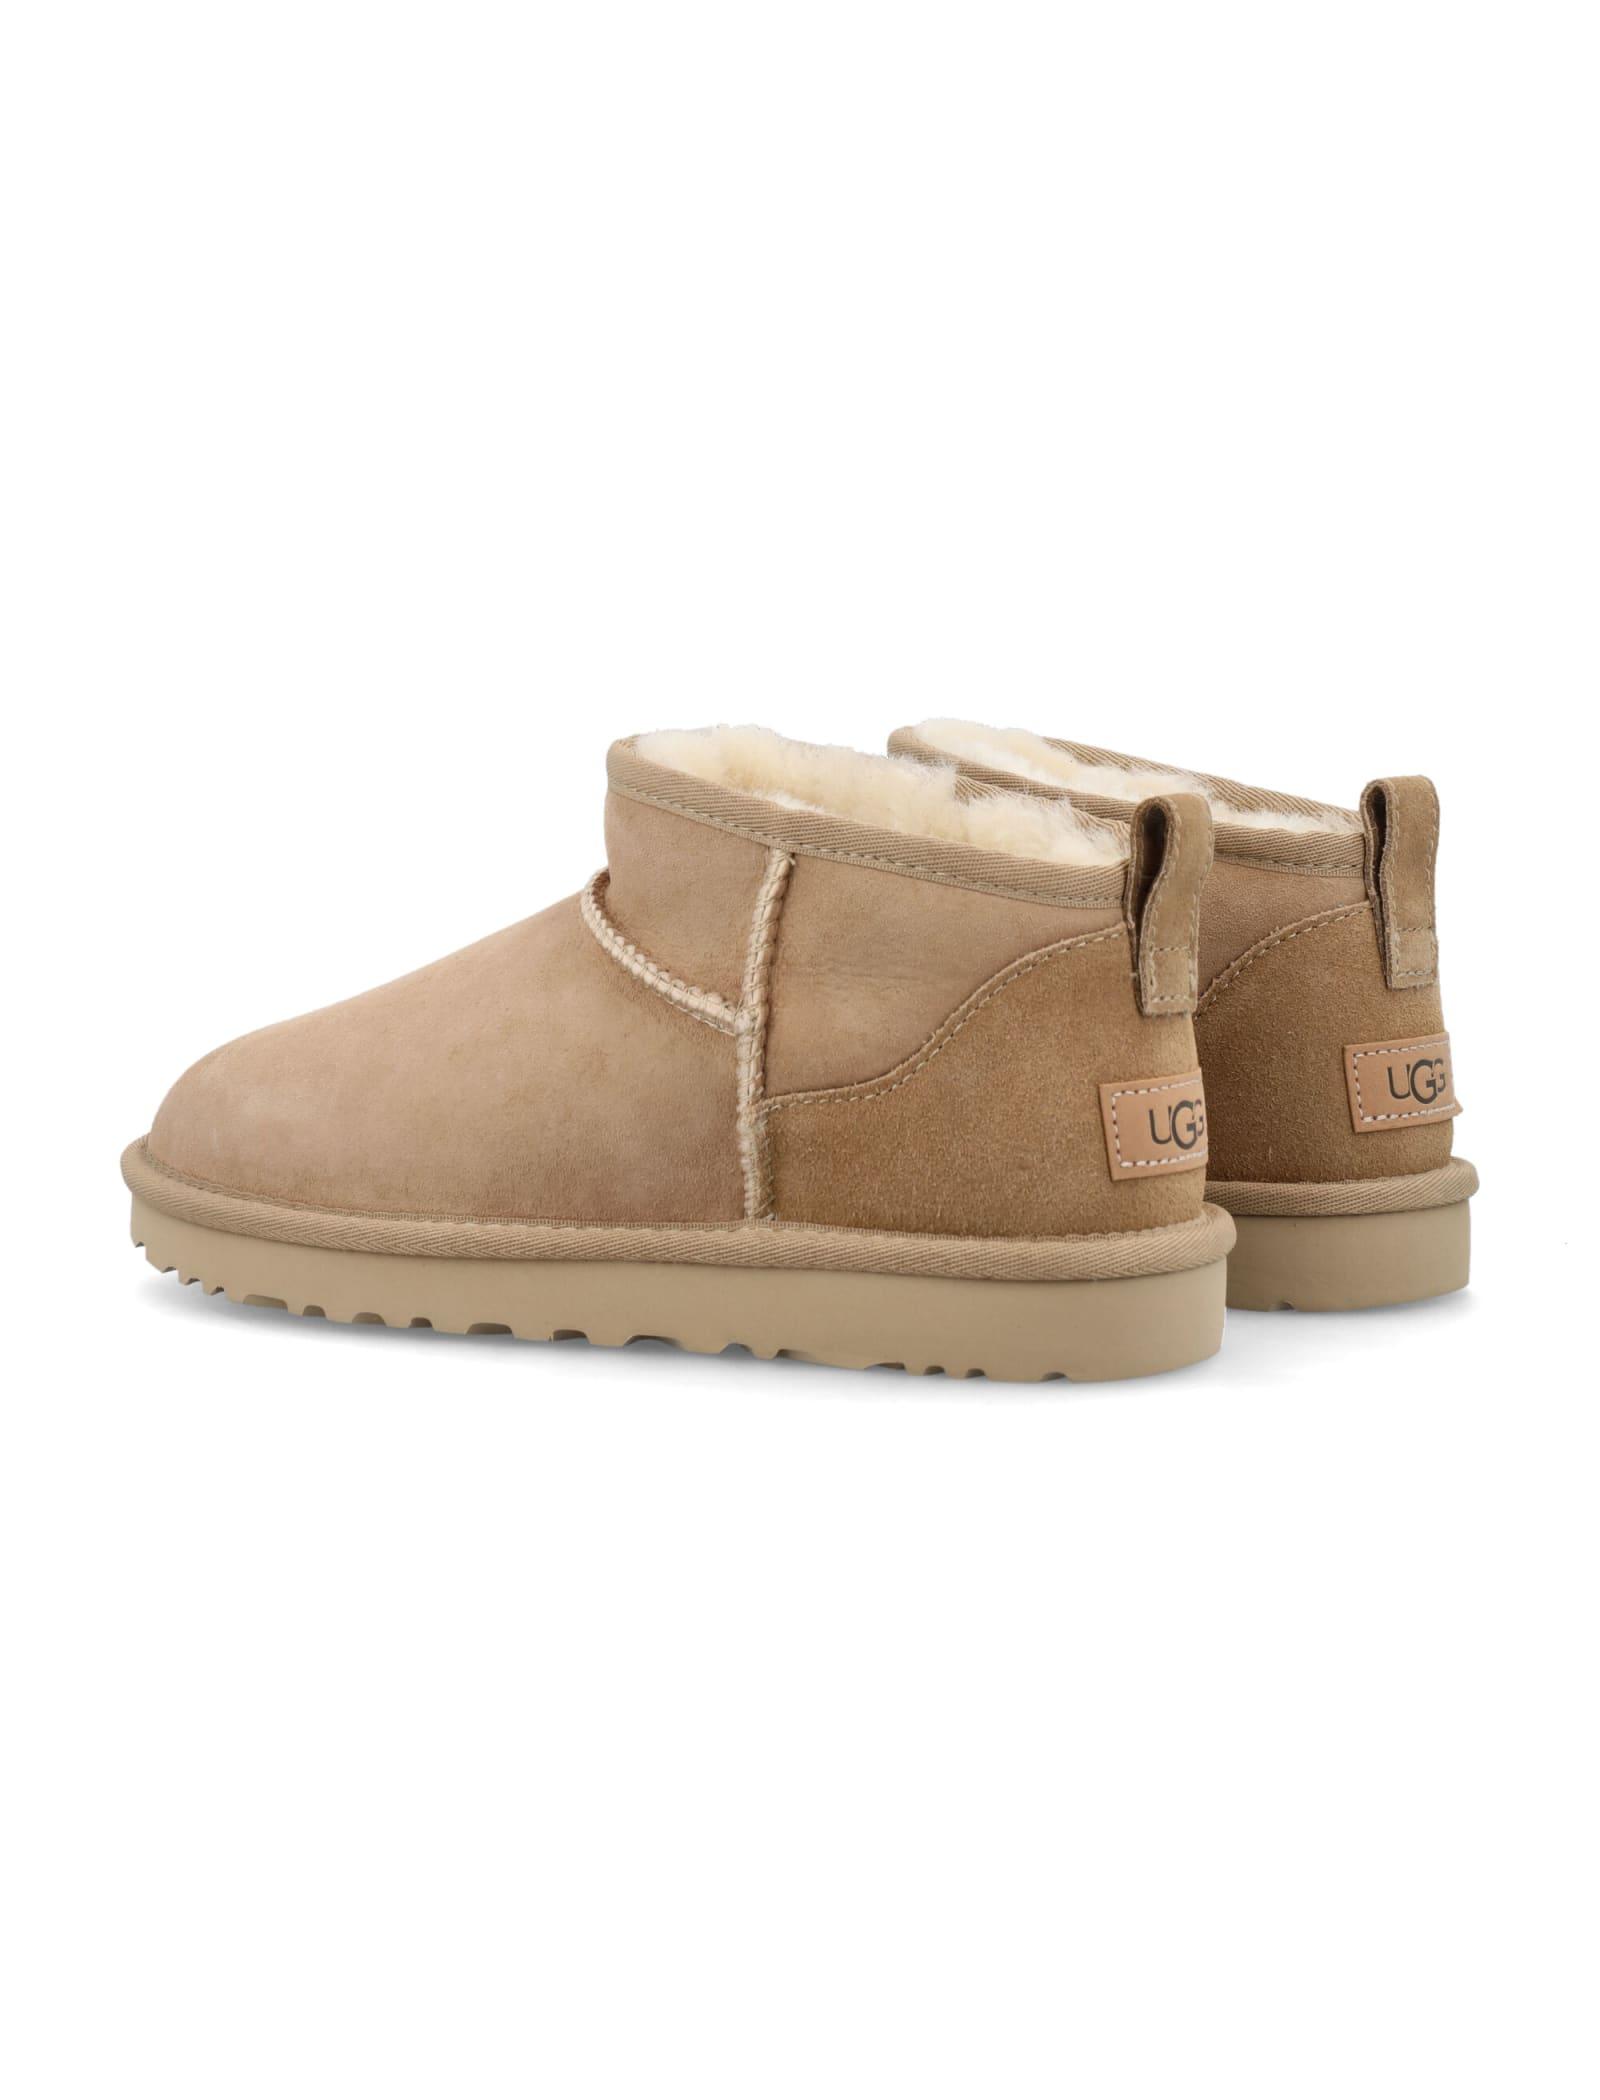 UGG Leather Australia Boots Beige in Sand (Natural) - Save 52% | Lyst